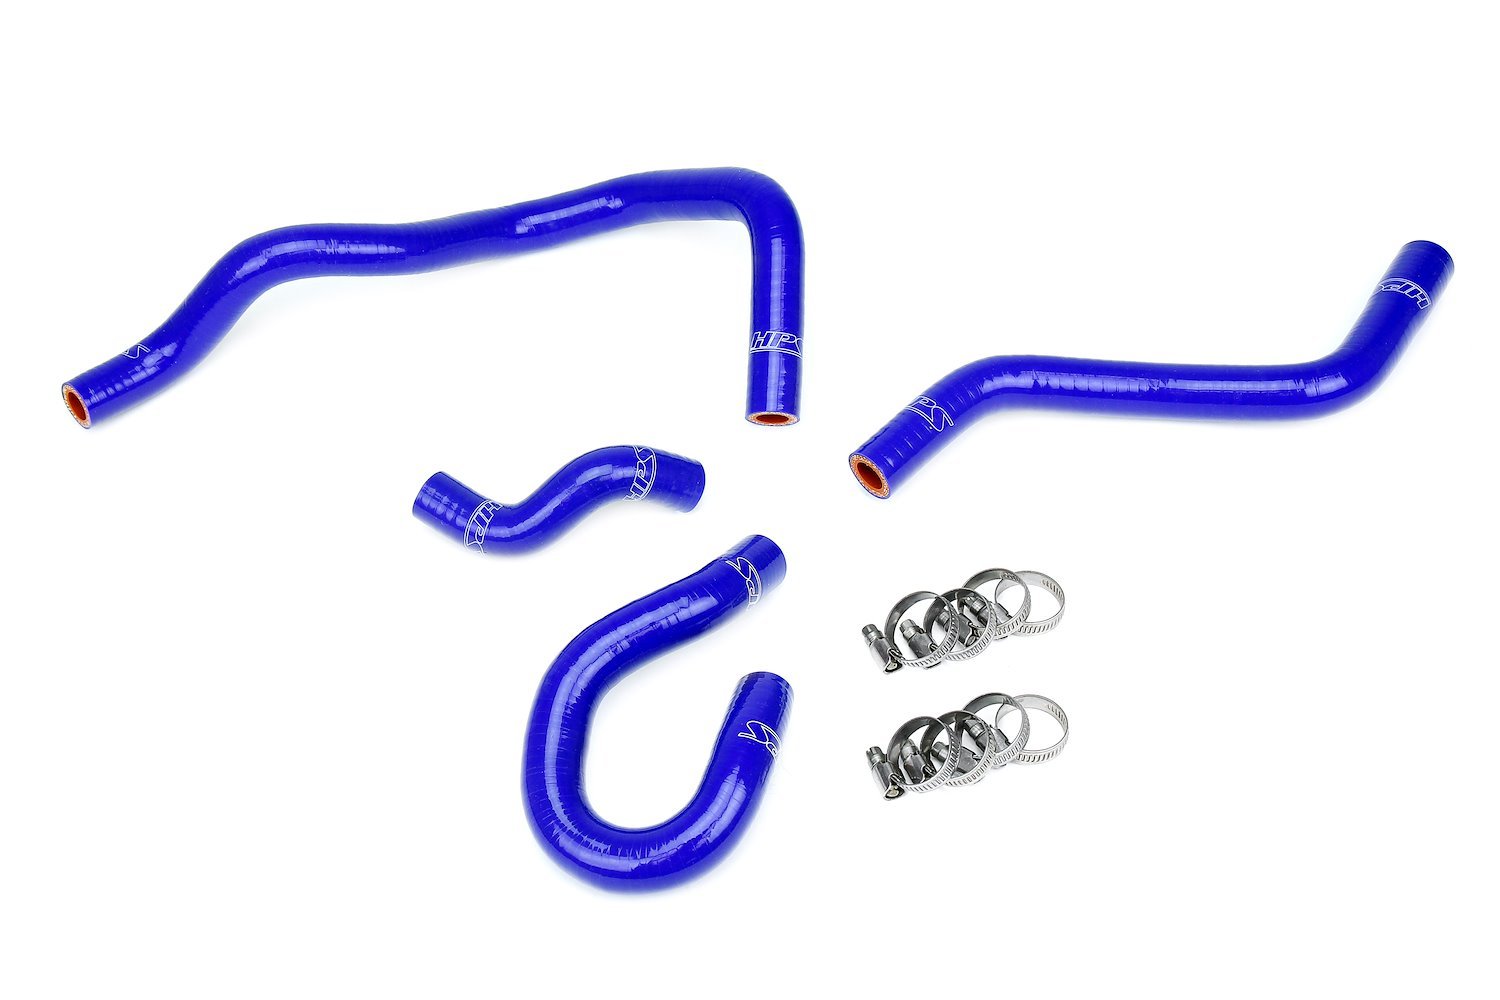 57-1774-BLUE Heater Hose Kit, 3-Ply Reinforced Silicone, Replaces Rubber Heater Coolant & Water Bypass Hoses